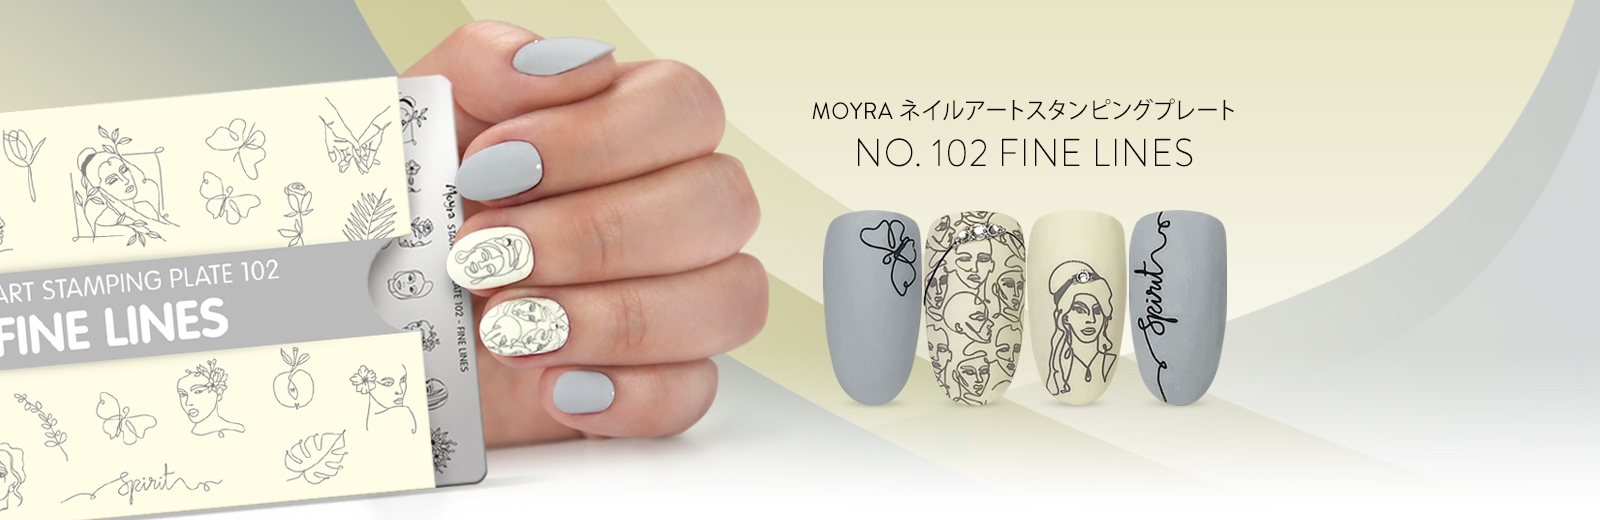 Moyra スタンピングプレート Stamping plate 102 Fine Lines